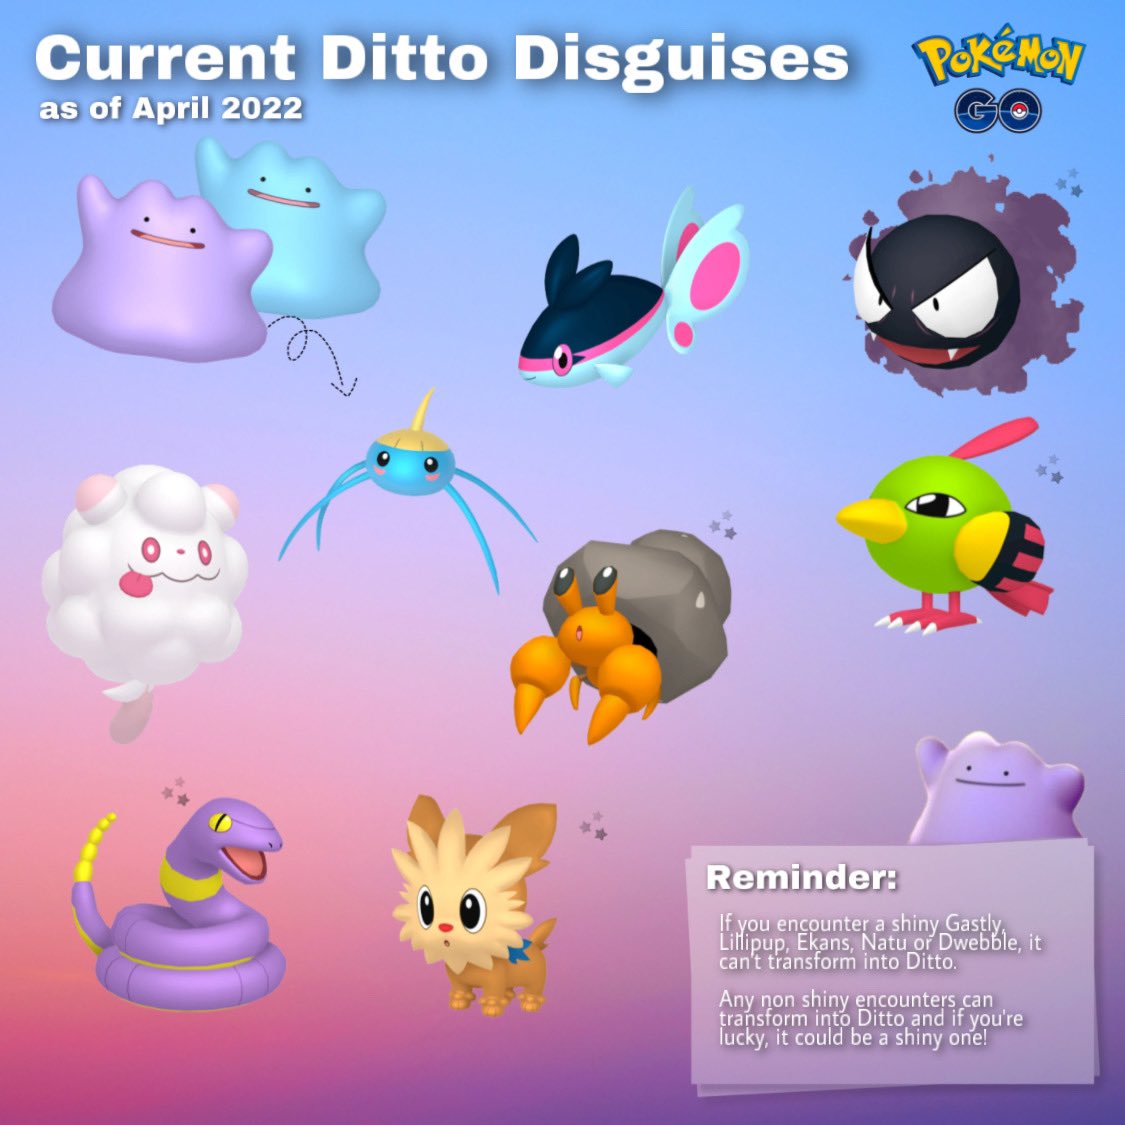 Current Ditto Disguises : r/pokemongo